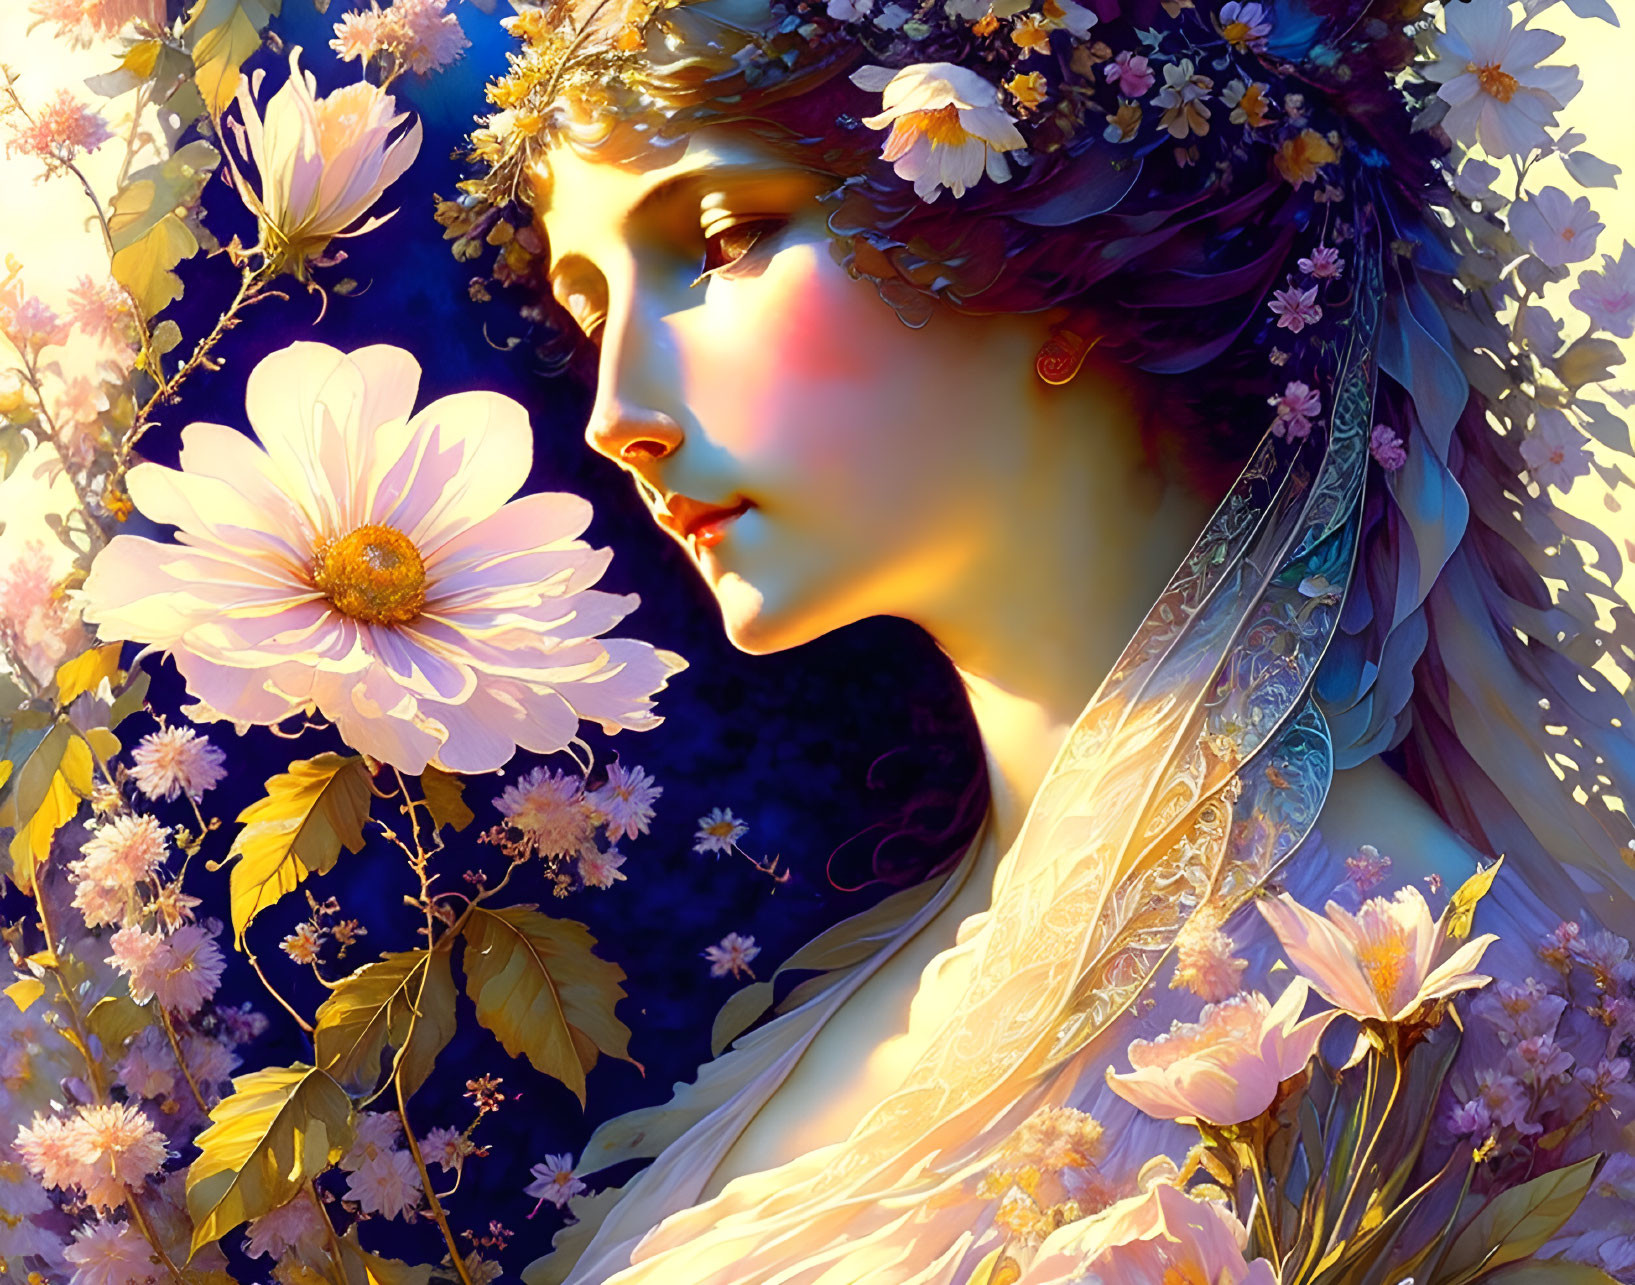 Ethereal woman with floral adornments in golden light among blooming flowers